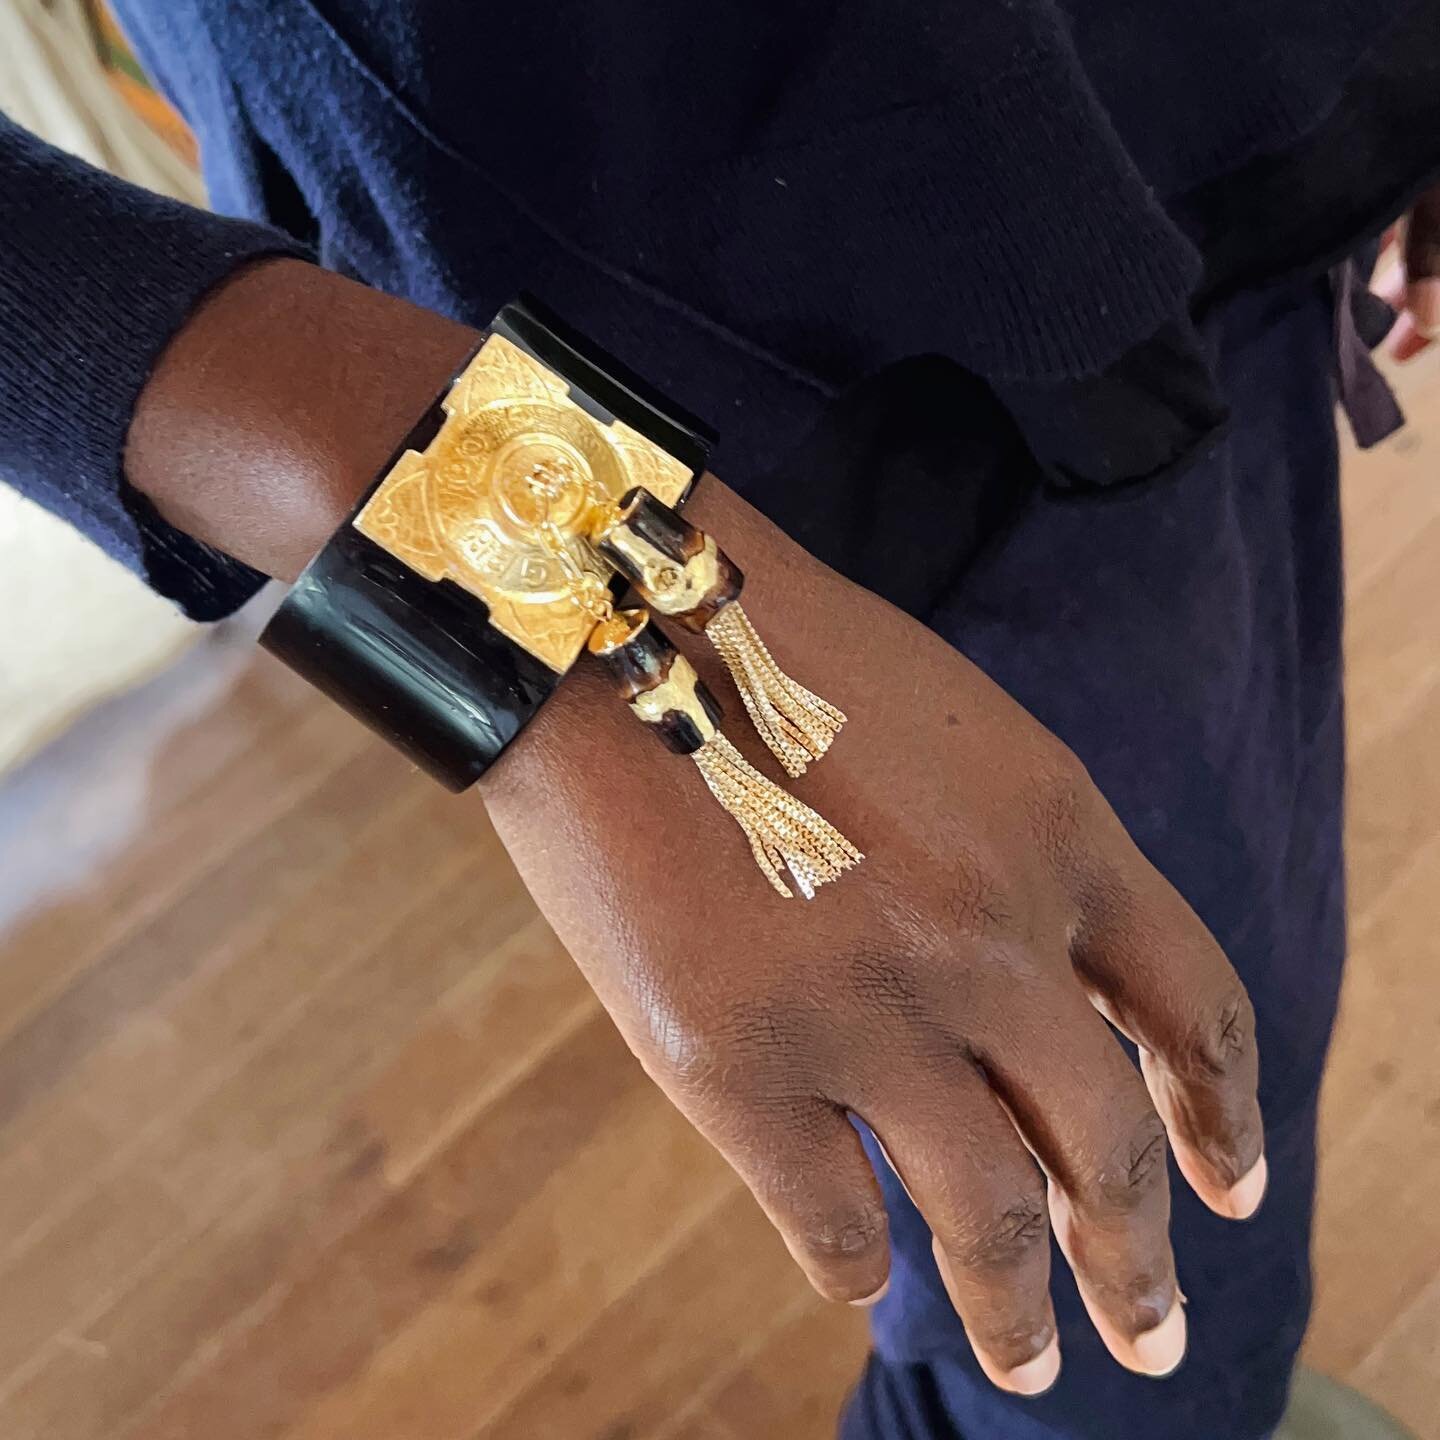 Beautiful @hildaonline wearing #artworkerprojects cuff bracelet with bamboo tassels and again, beautiful✨. Paddington market next weekend! Not this one coming, the one after on 6th May and I&rsquo;ll see you there 🤨 #paddingtonmarkets #eastlindfield